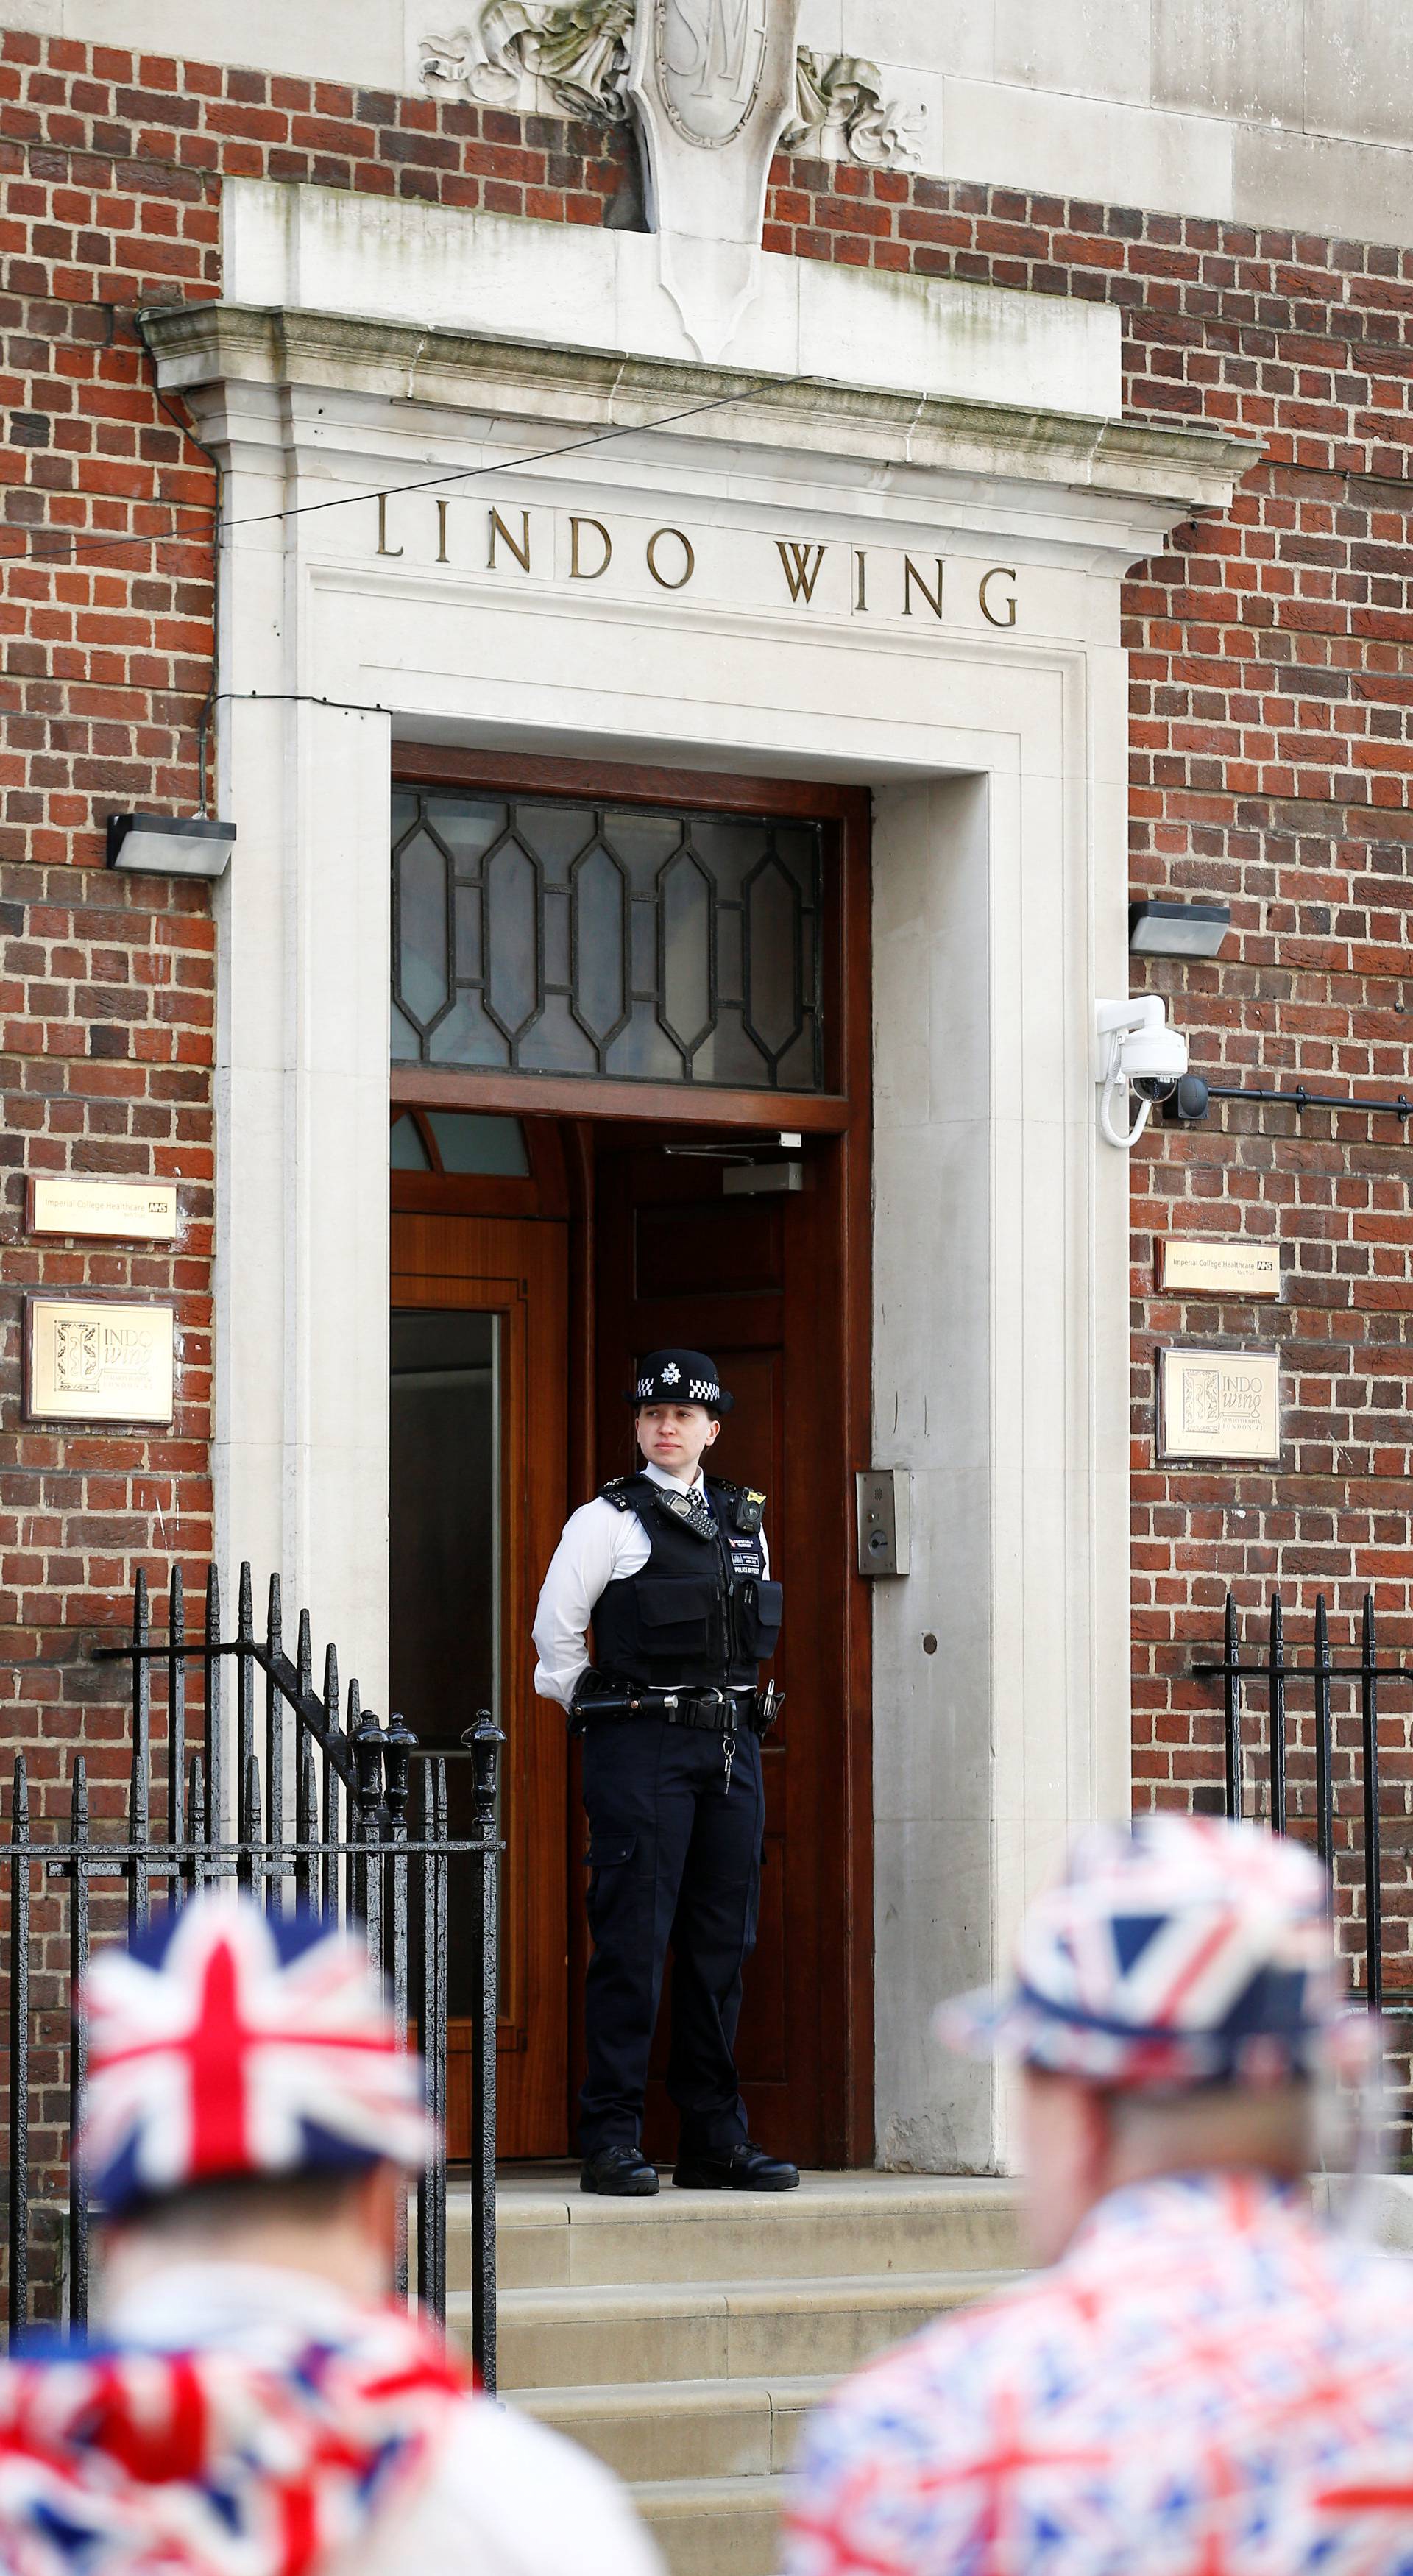 Supporters of the royal family stand outside the Lindo Wing of St Mary's Hospital after Britain's Catherine, the Duchess of Cambridge, was admitted after going into labour ahead of the birth of her third child, in London